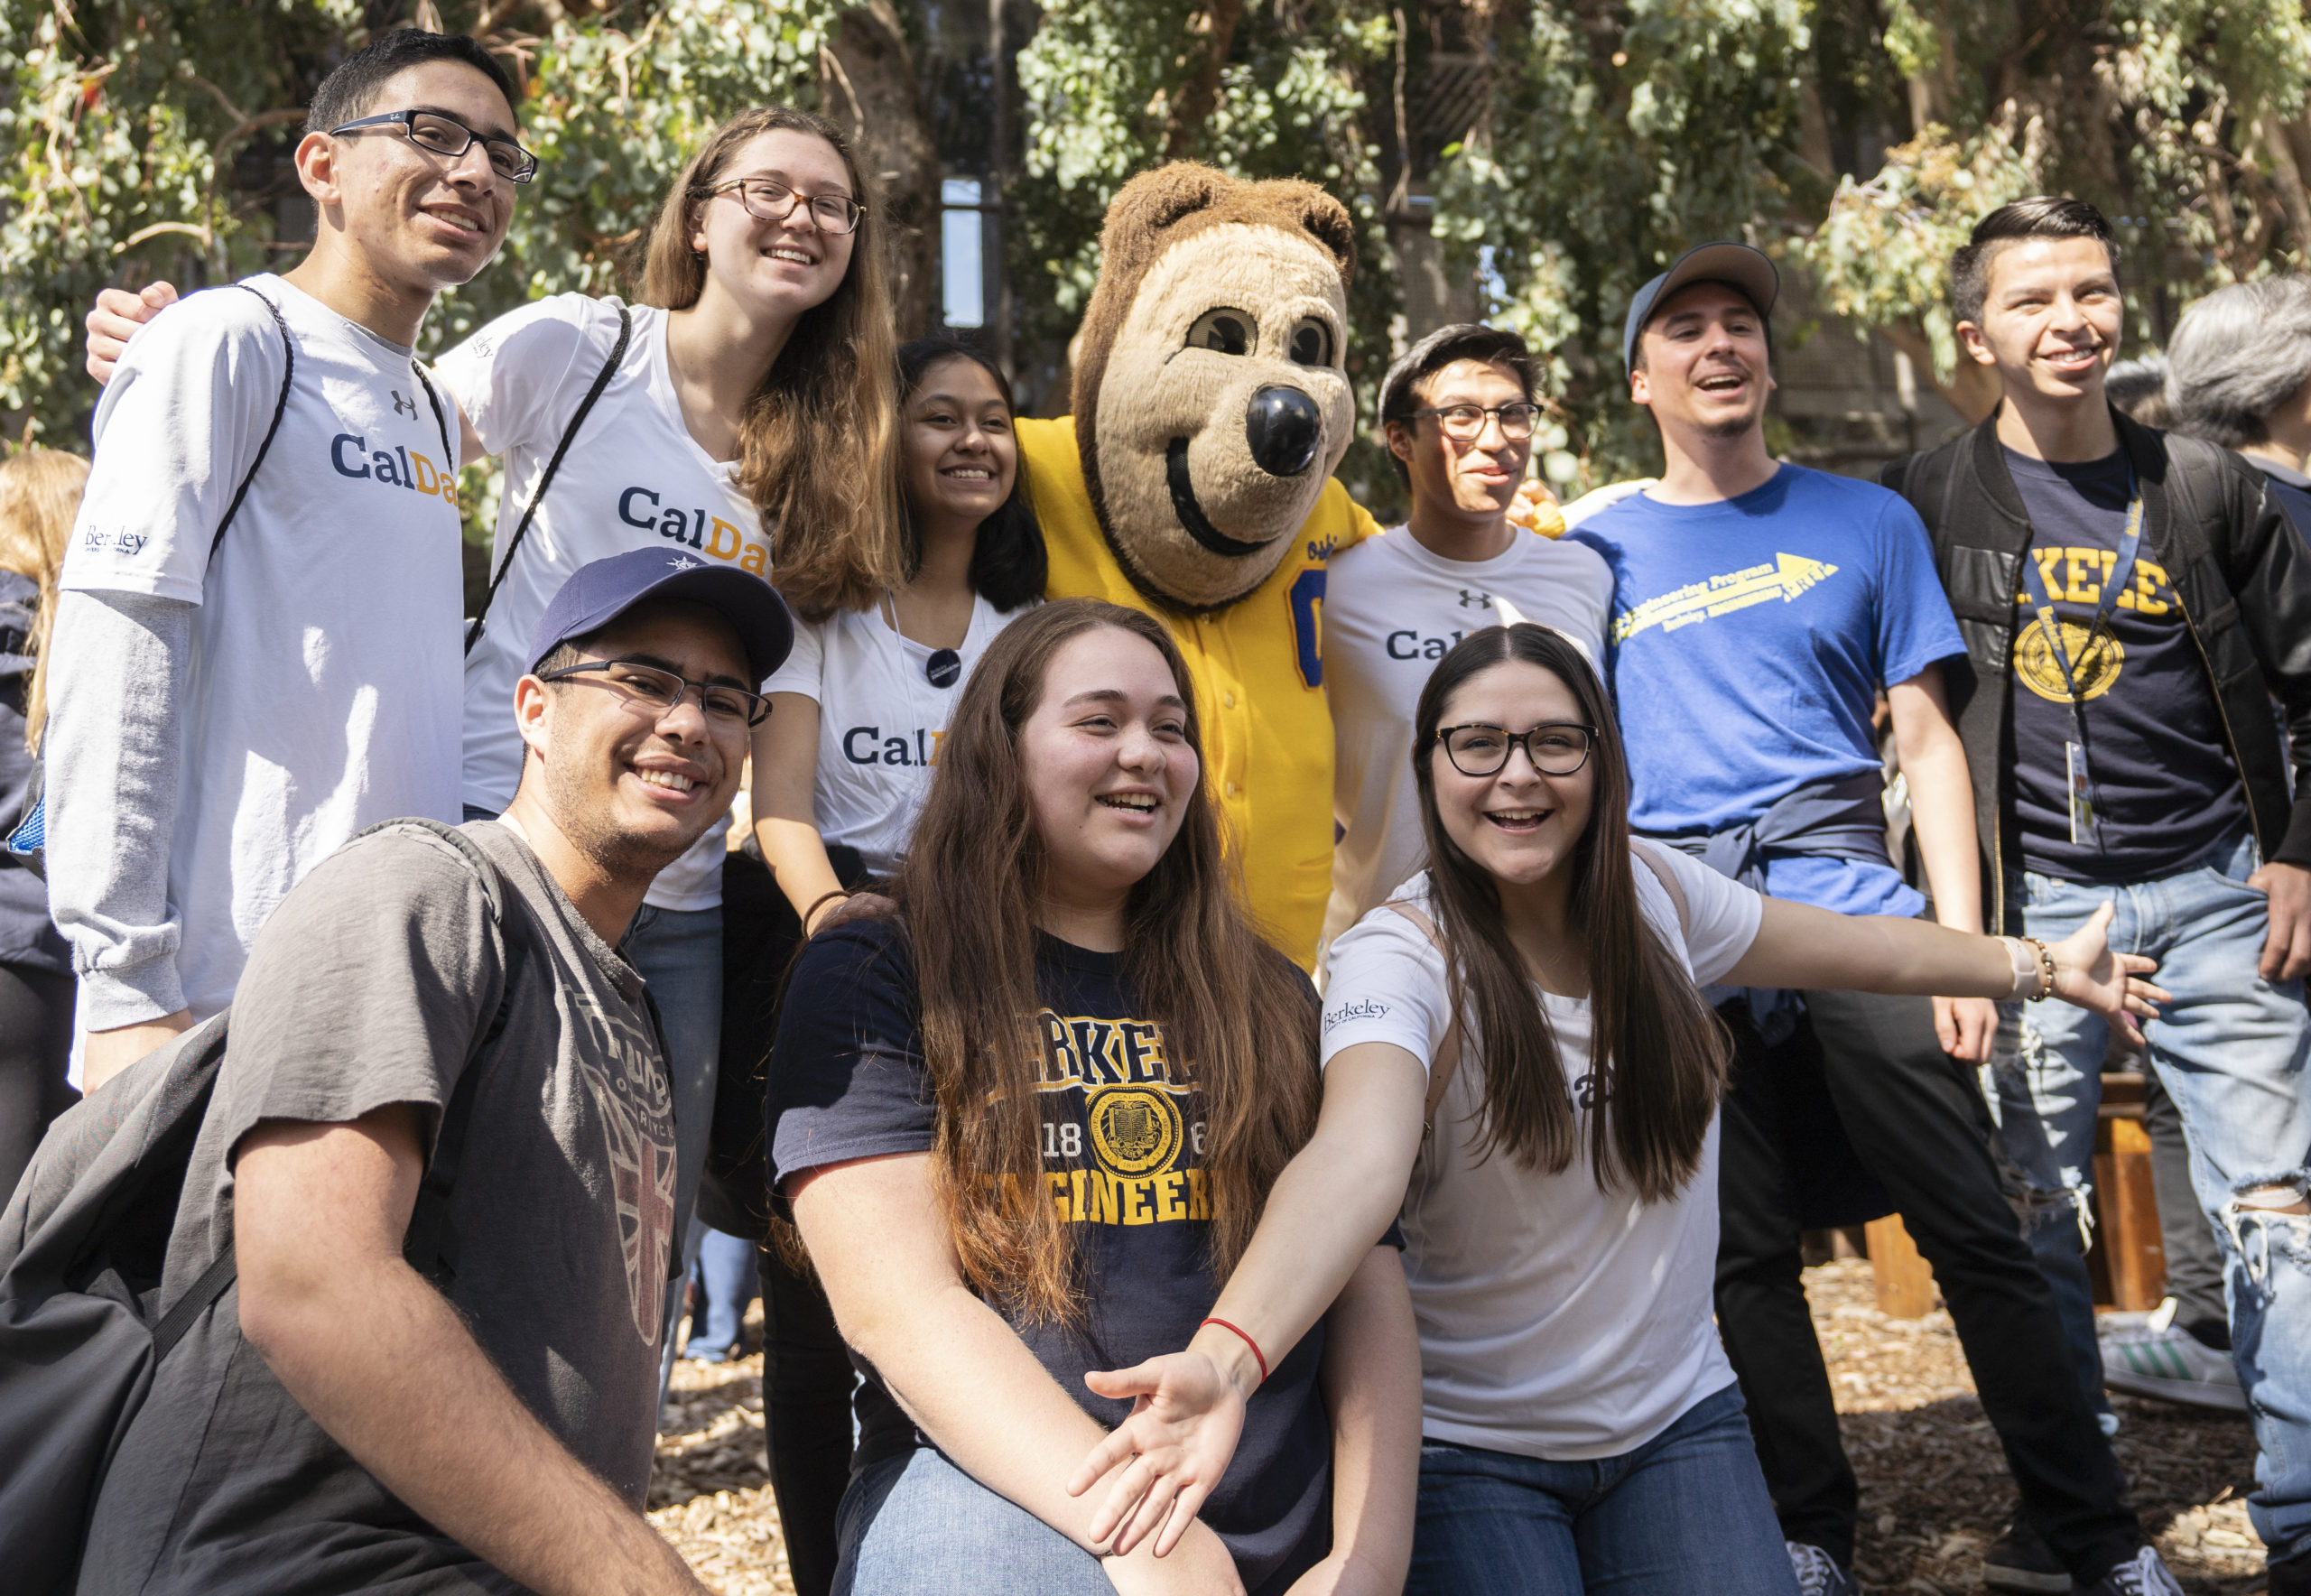 Group photo of students with Cal's mascot Oski